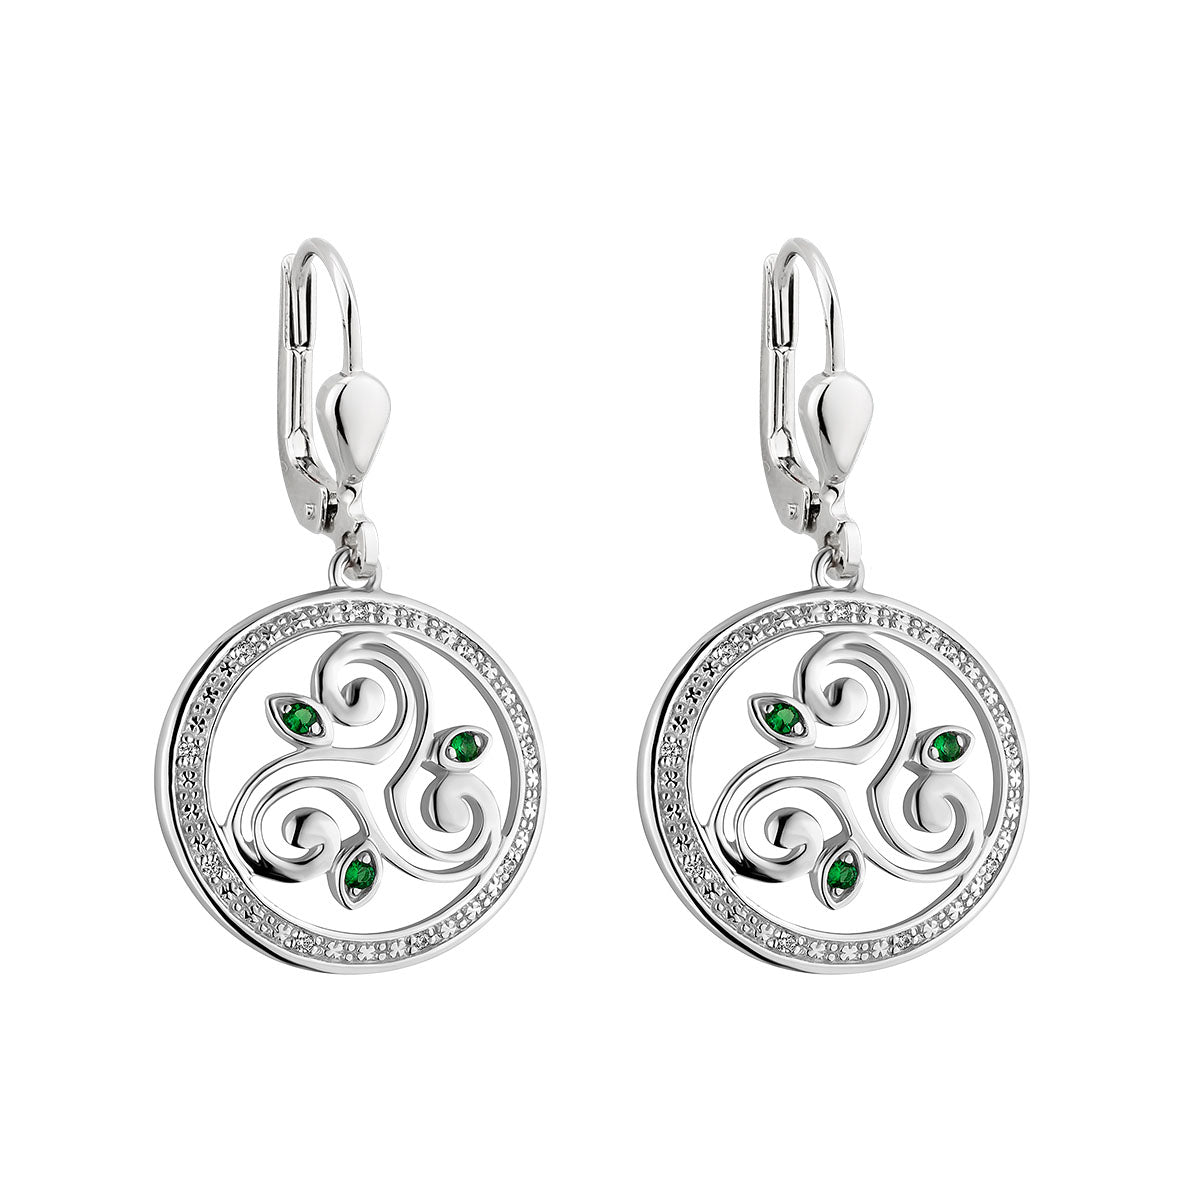 Silver Crystal Spiral Circle Drop Earrings s34115 from Solvar